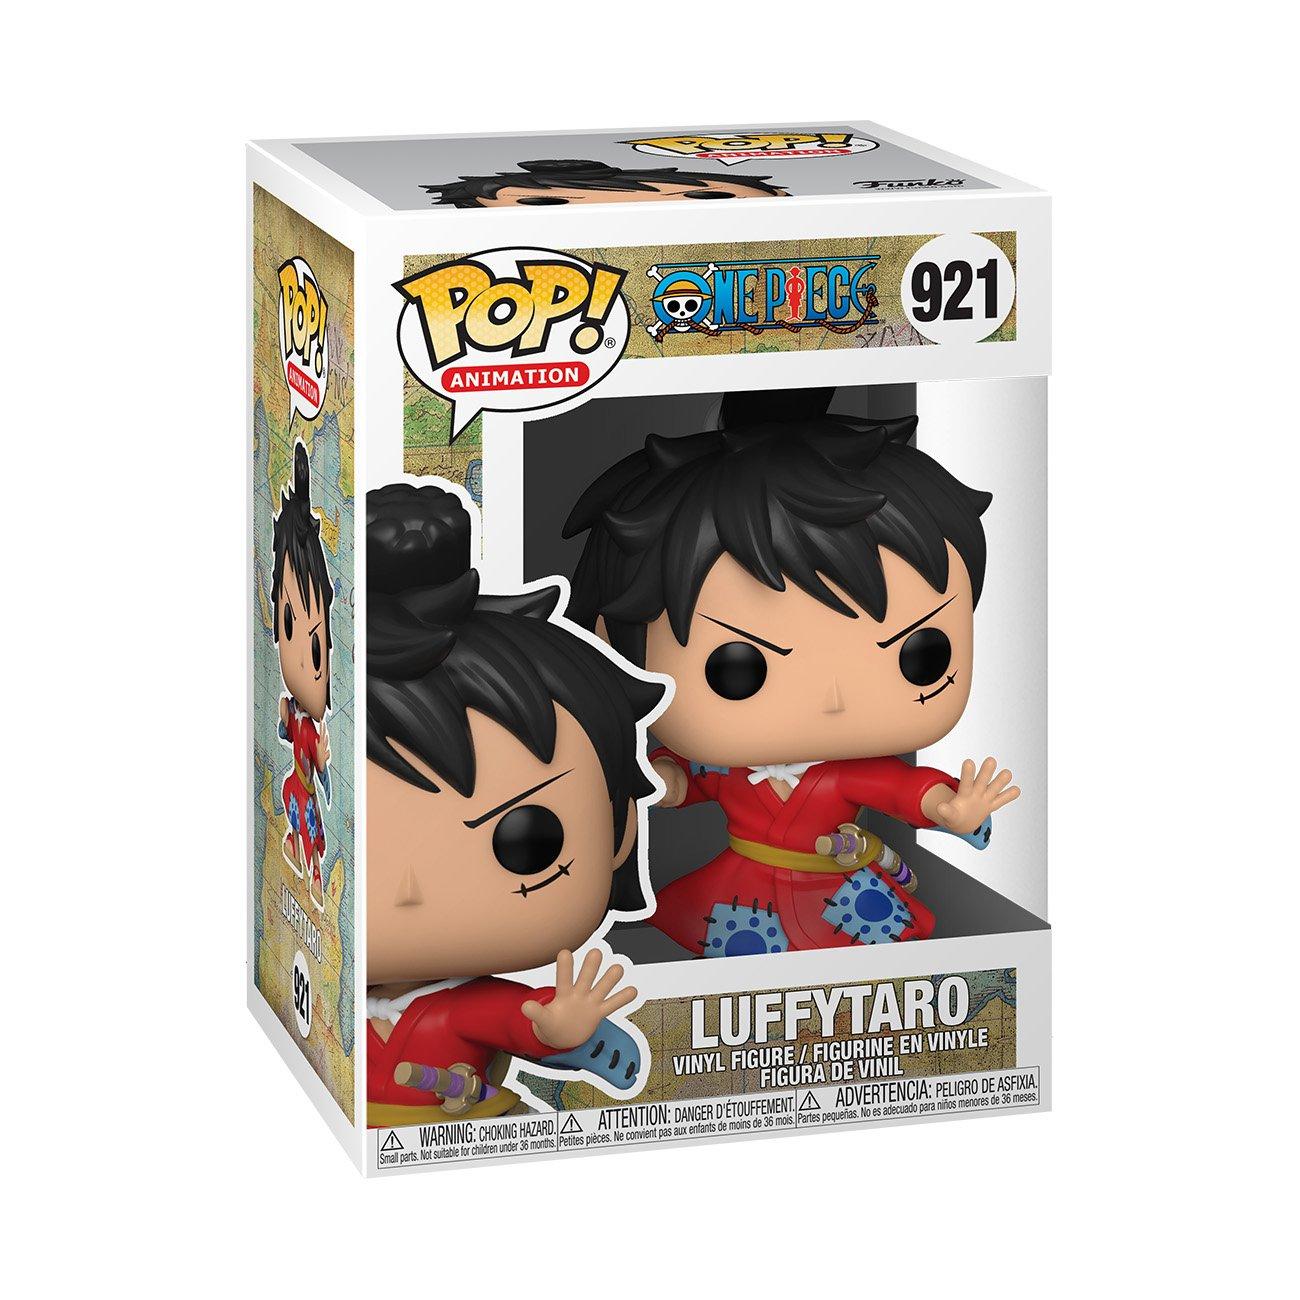 Funko Pop Luffy going with Merry One Piece 111